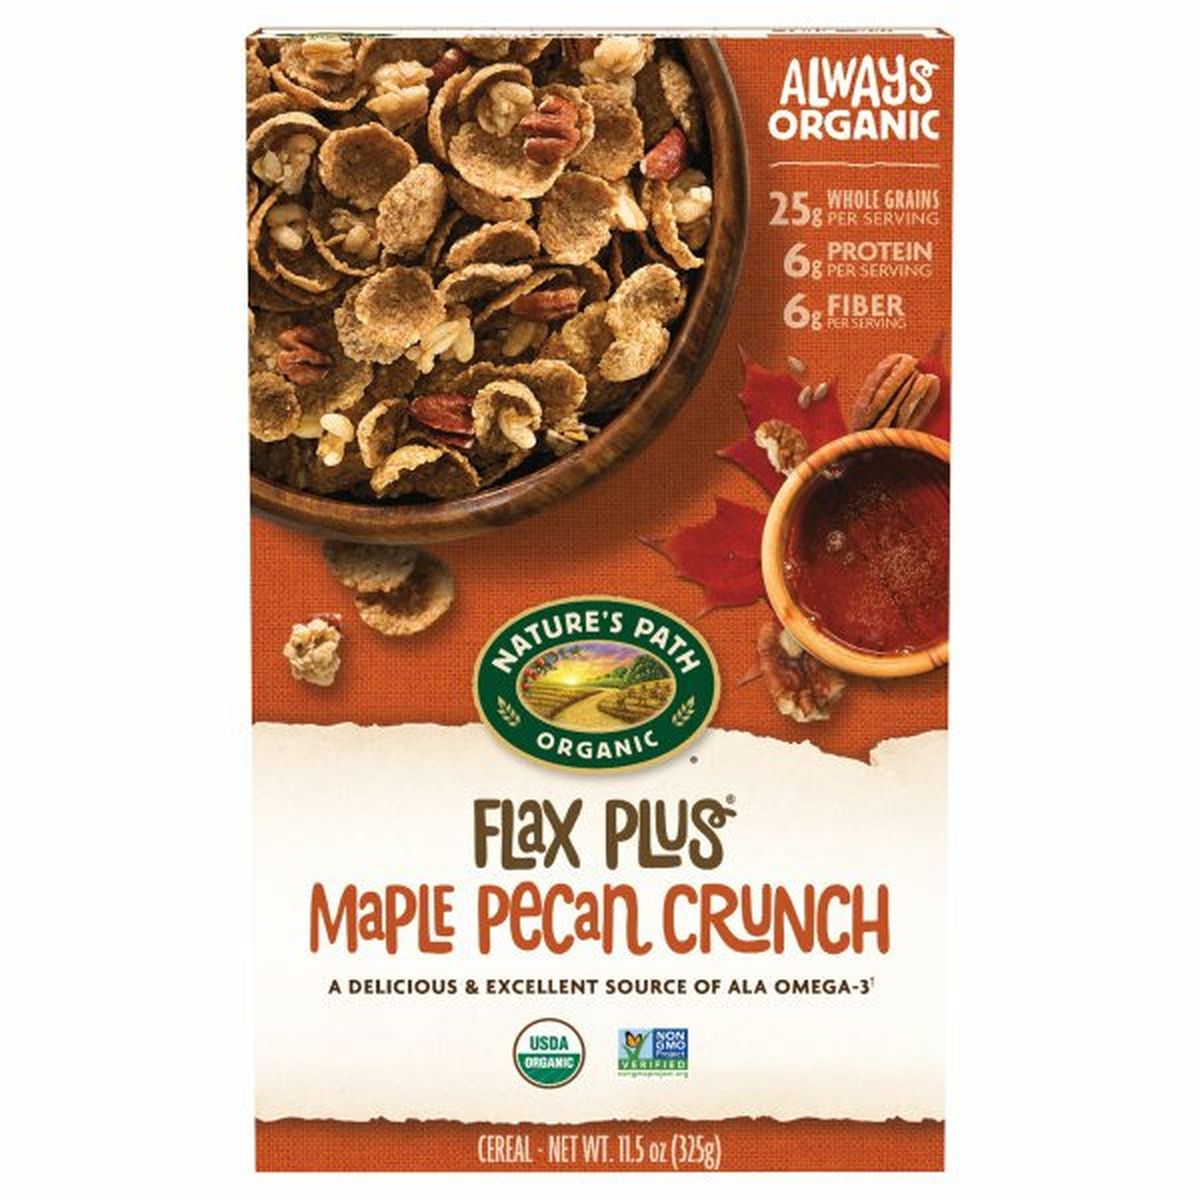 Calories in Nature's Path Cereal, Maple Pecan Crunch, Flax Plus